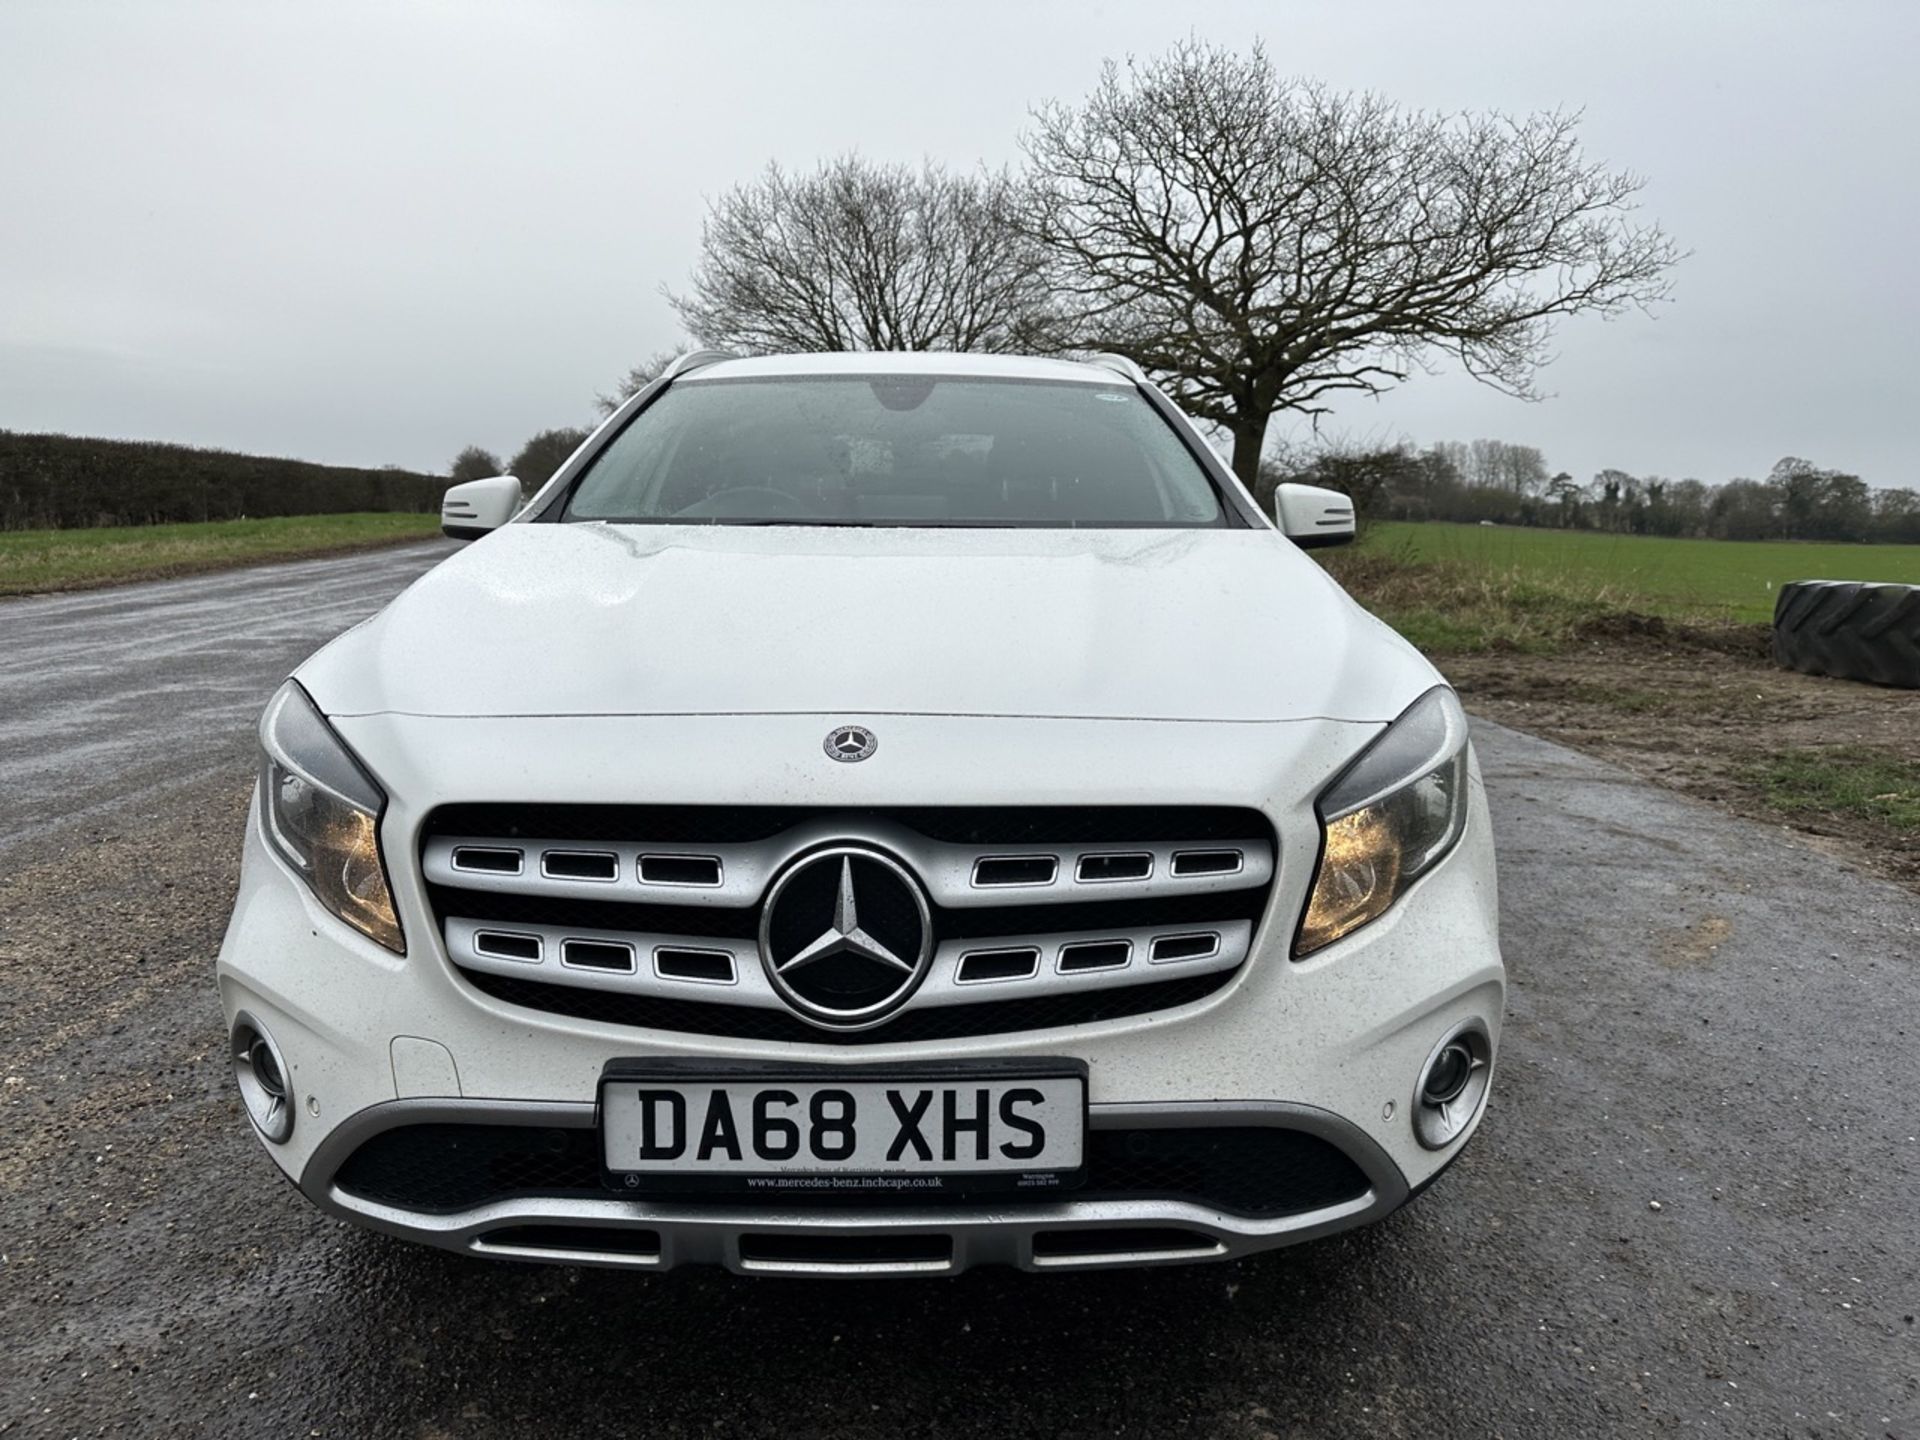 MERCEDES GLA 200d AUTO "SPORT EXECUTIVE" 2019 MODEL - LEATHER - LOW MILES - AIR CON - Image 4 of 17